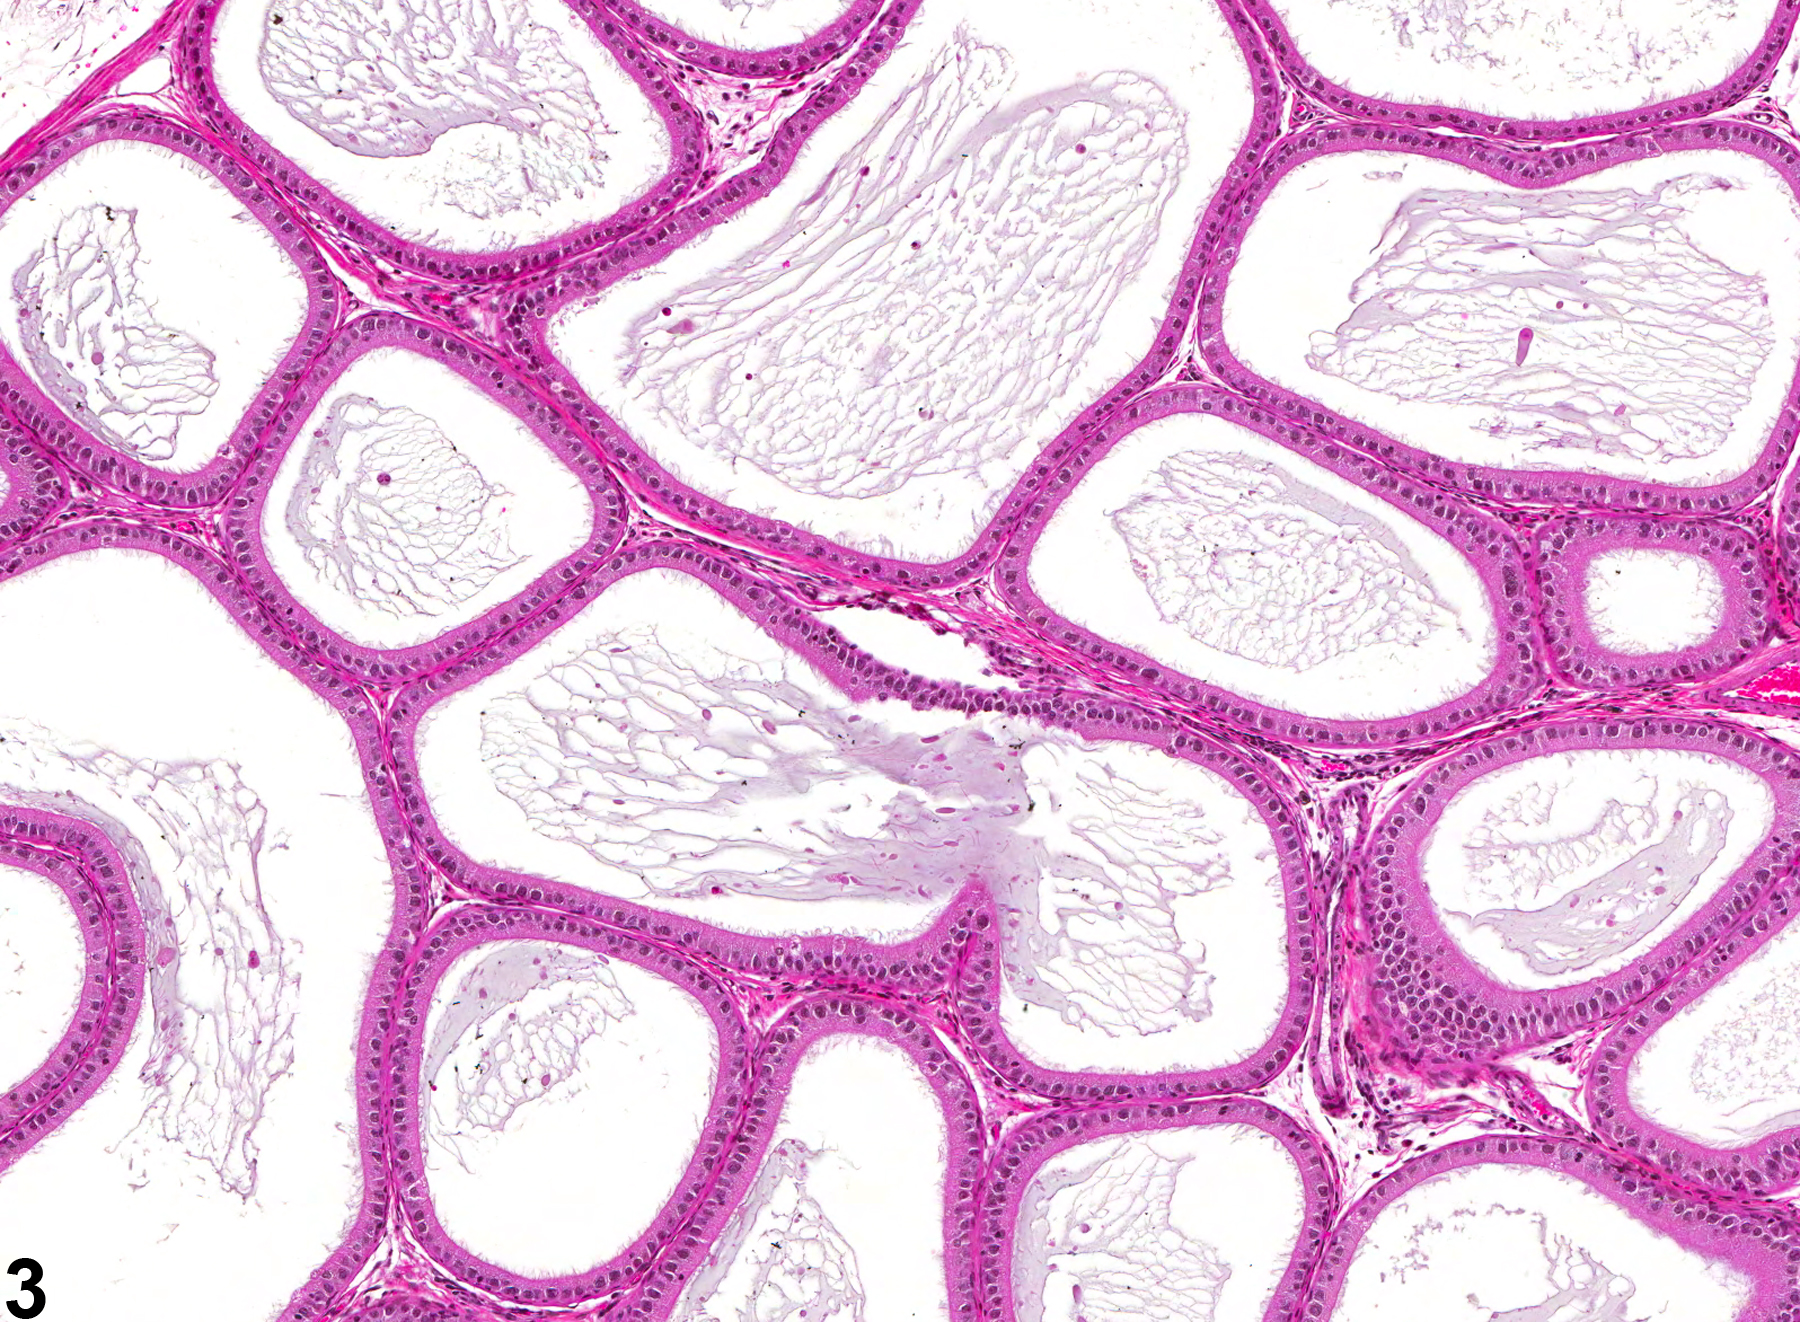 Image of hypospermia in the epididymis from a male F344/N rat in a subchronic study